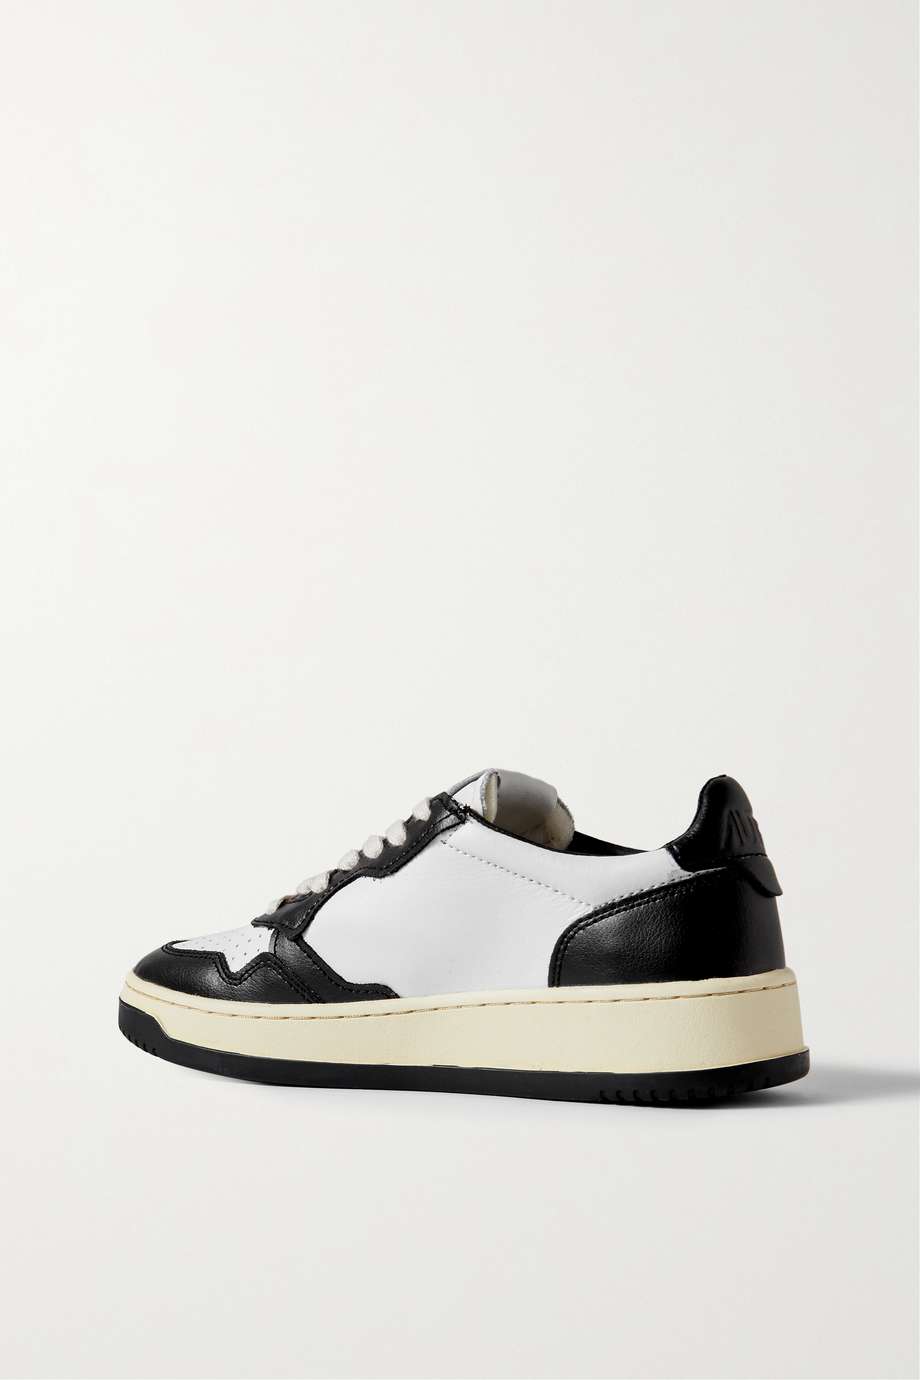 Autry - Medalist Low Leather - Black and White